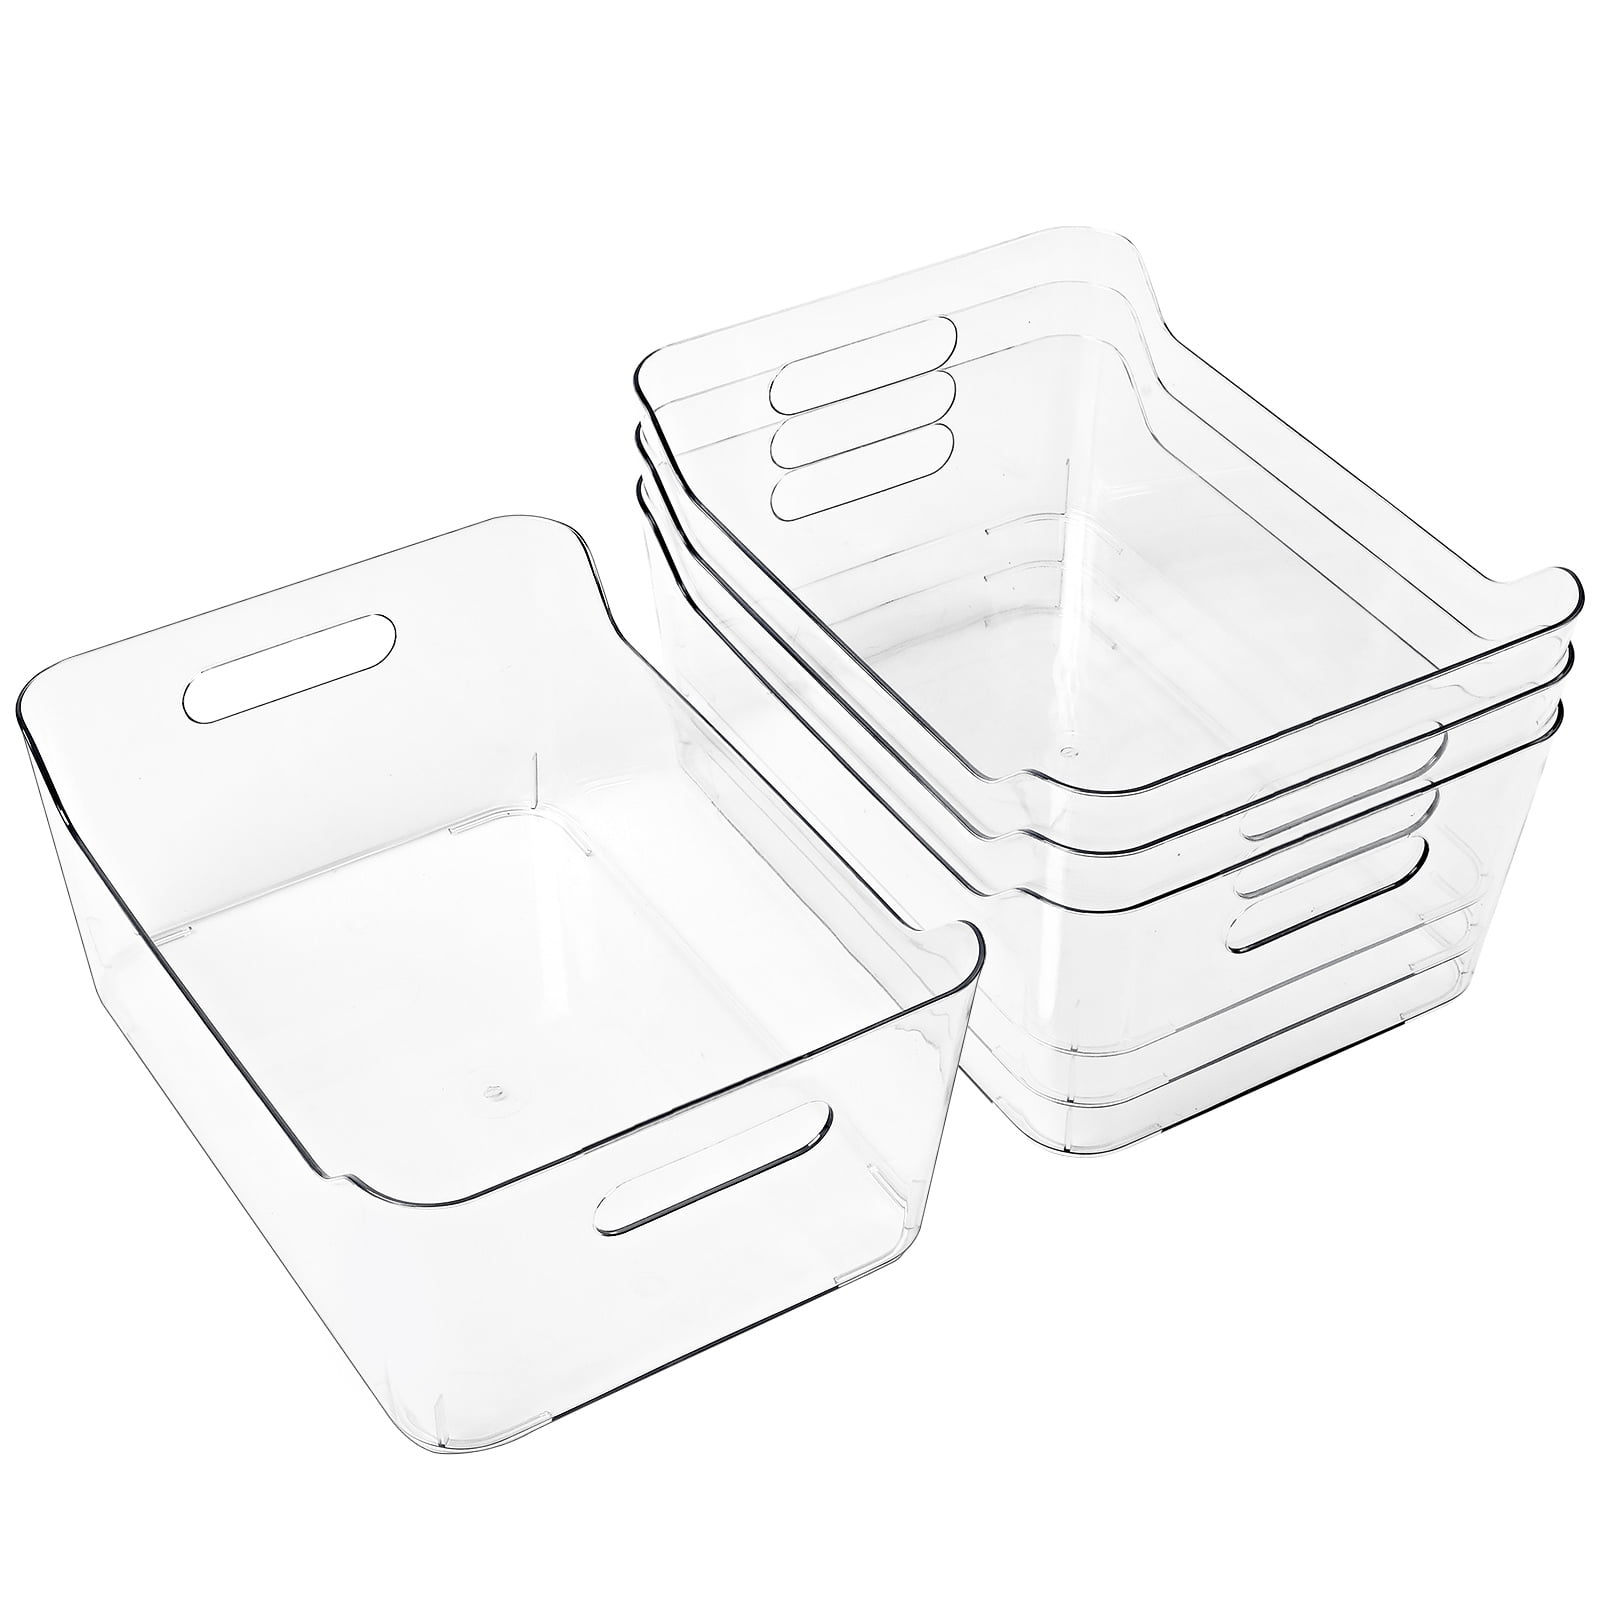 4 Pack X-Large Plastic Storage Bins with Built-in Handles, Clear Pantry  Food Organization and Storage, Open Container for Fridge, Kitchen, Bathroom